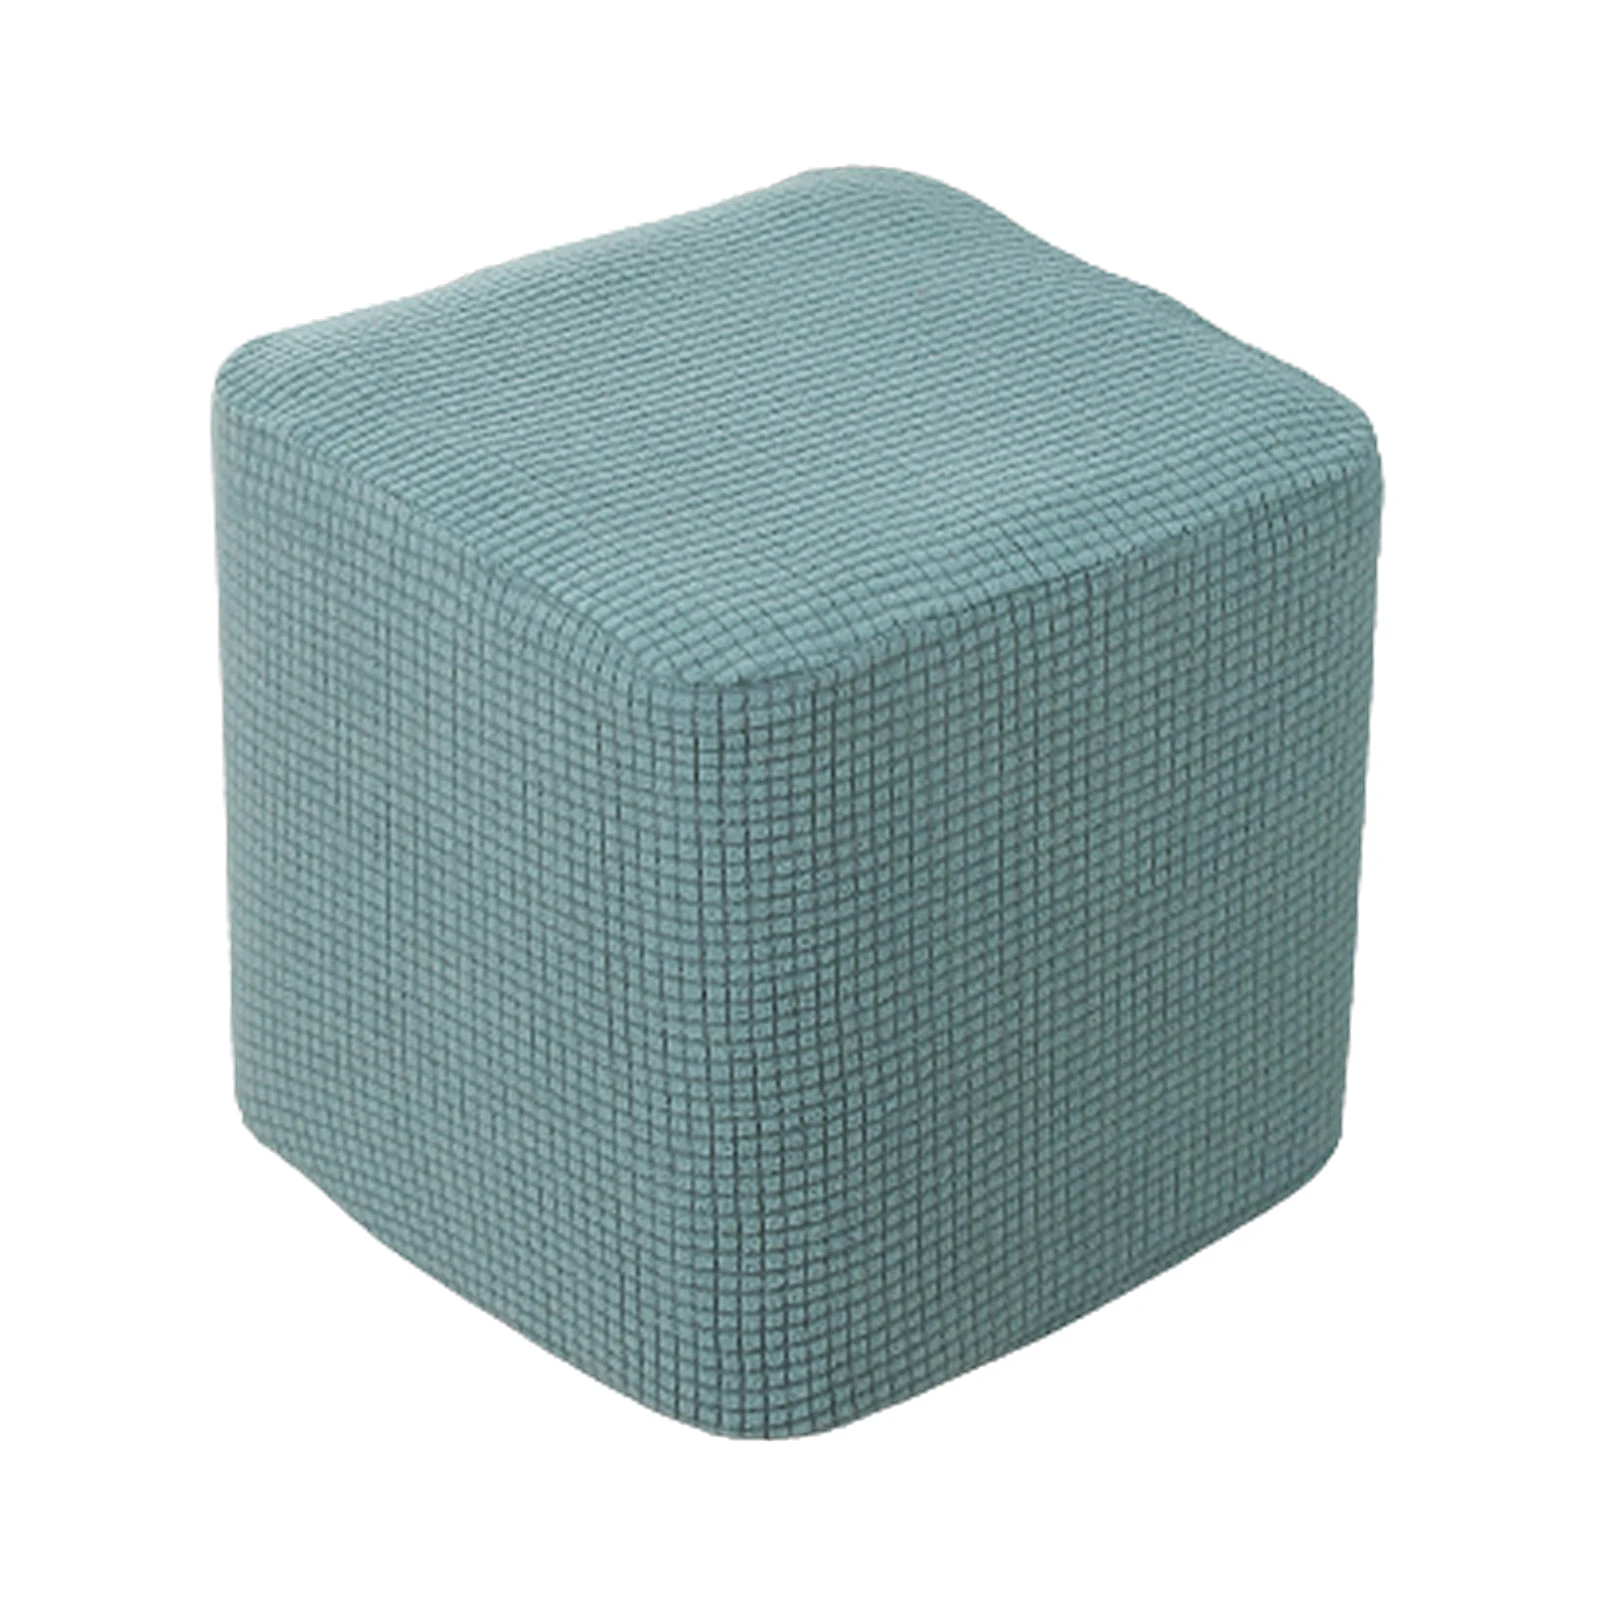 Stretch Footstool SlipCover Soft Rectangle Ottoman Cover with Elastic Furniture